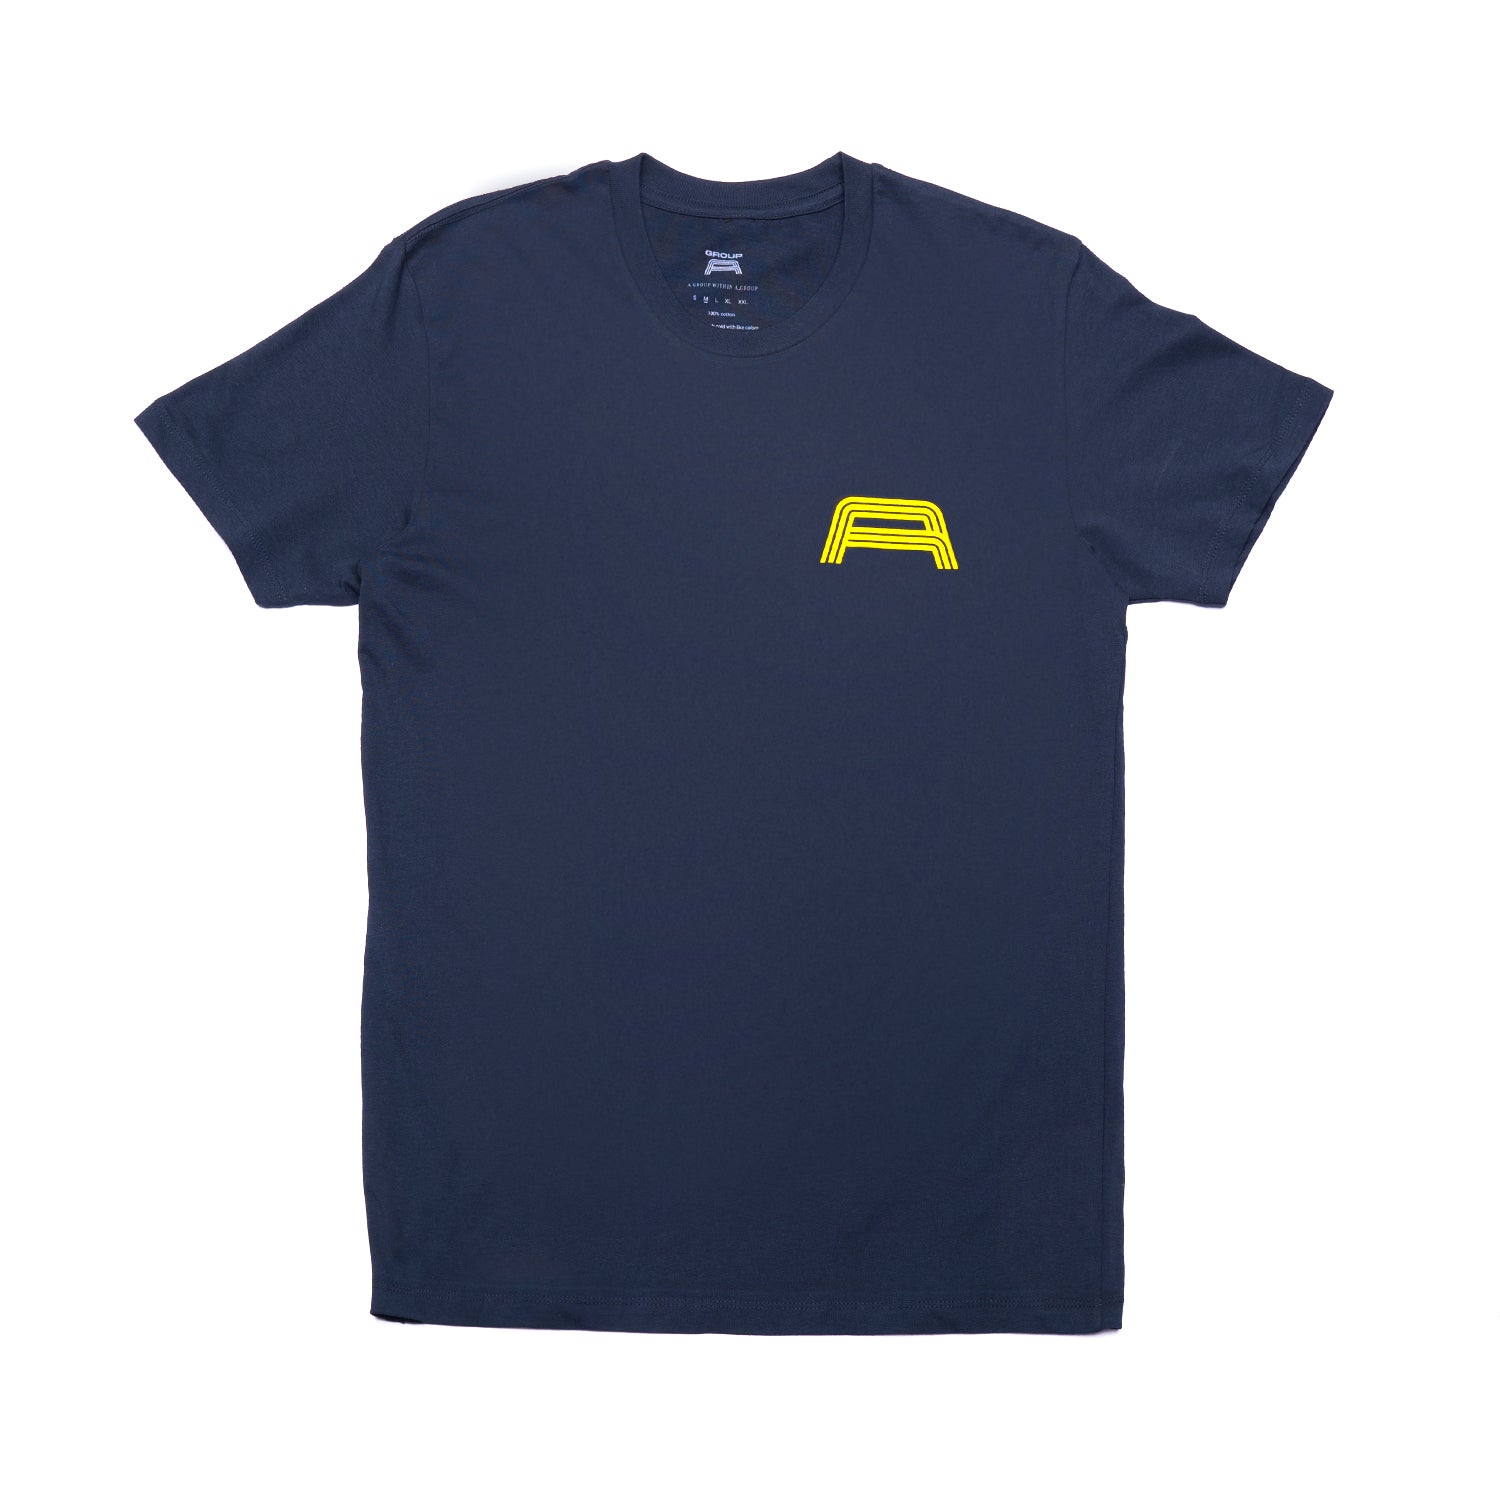 Double Hit tee - Navy and Yellow